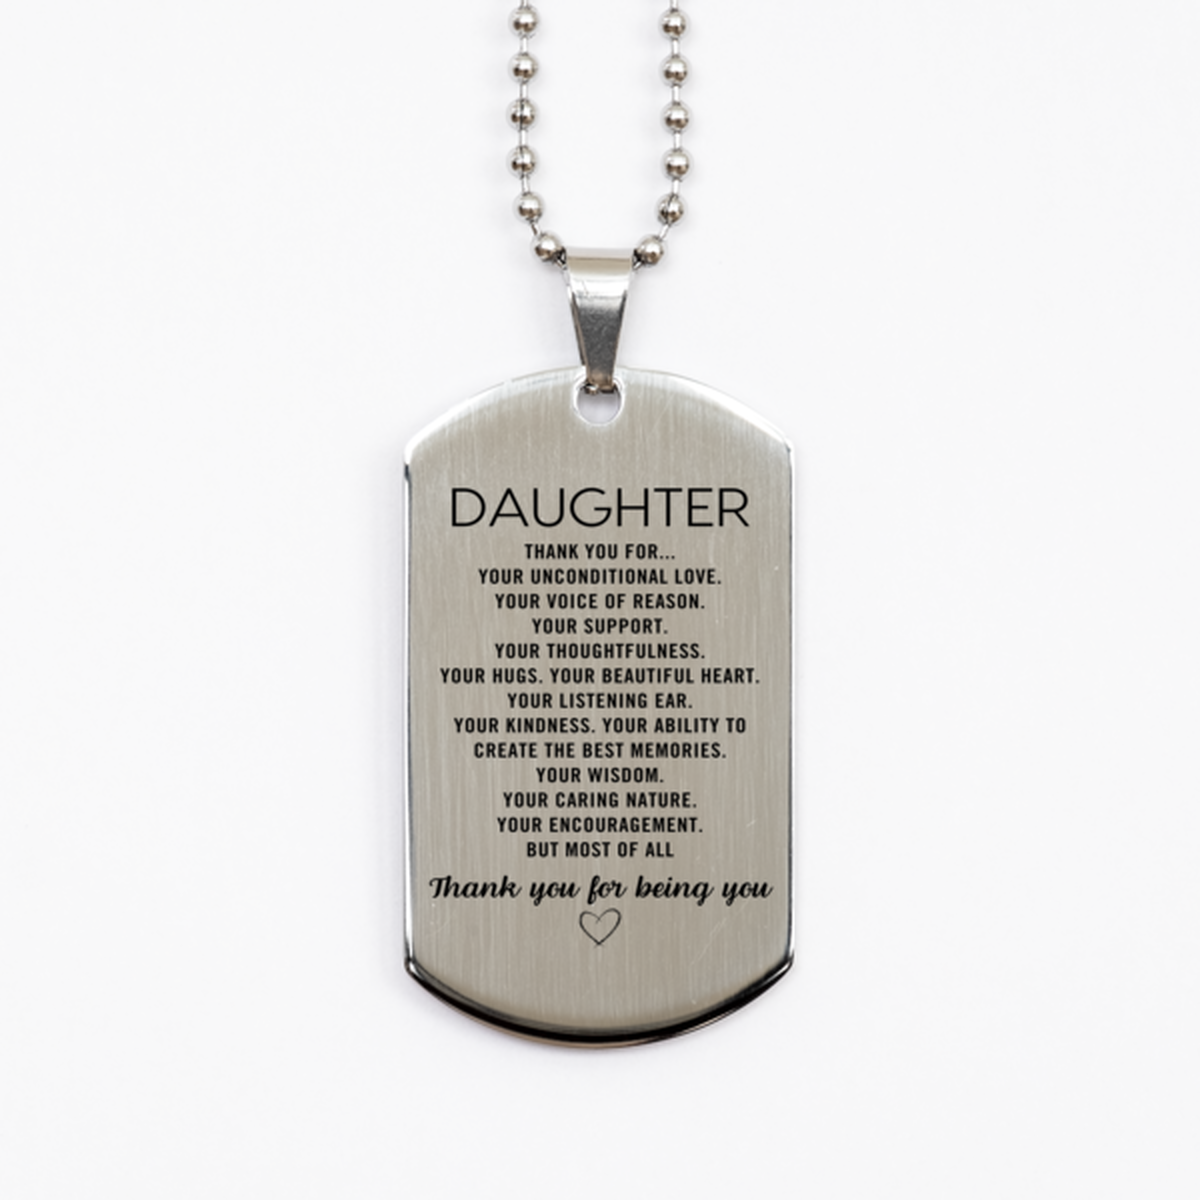 Daughter Silver Dog Tag Custom, Engraved Gifts For Daughter Christmas Graduation Birthday Gifts for Men Women Daughter Thank you for Your unconditional love